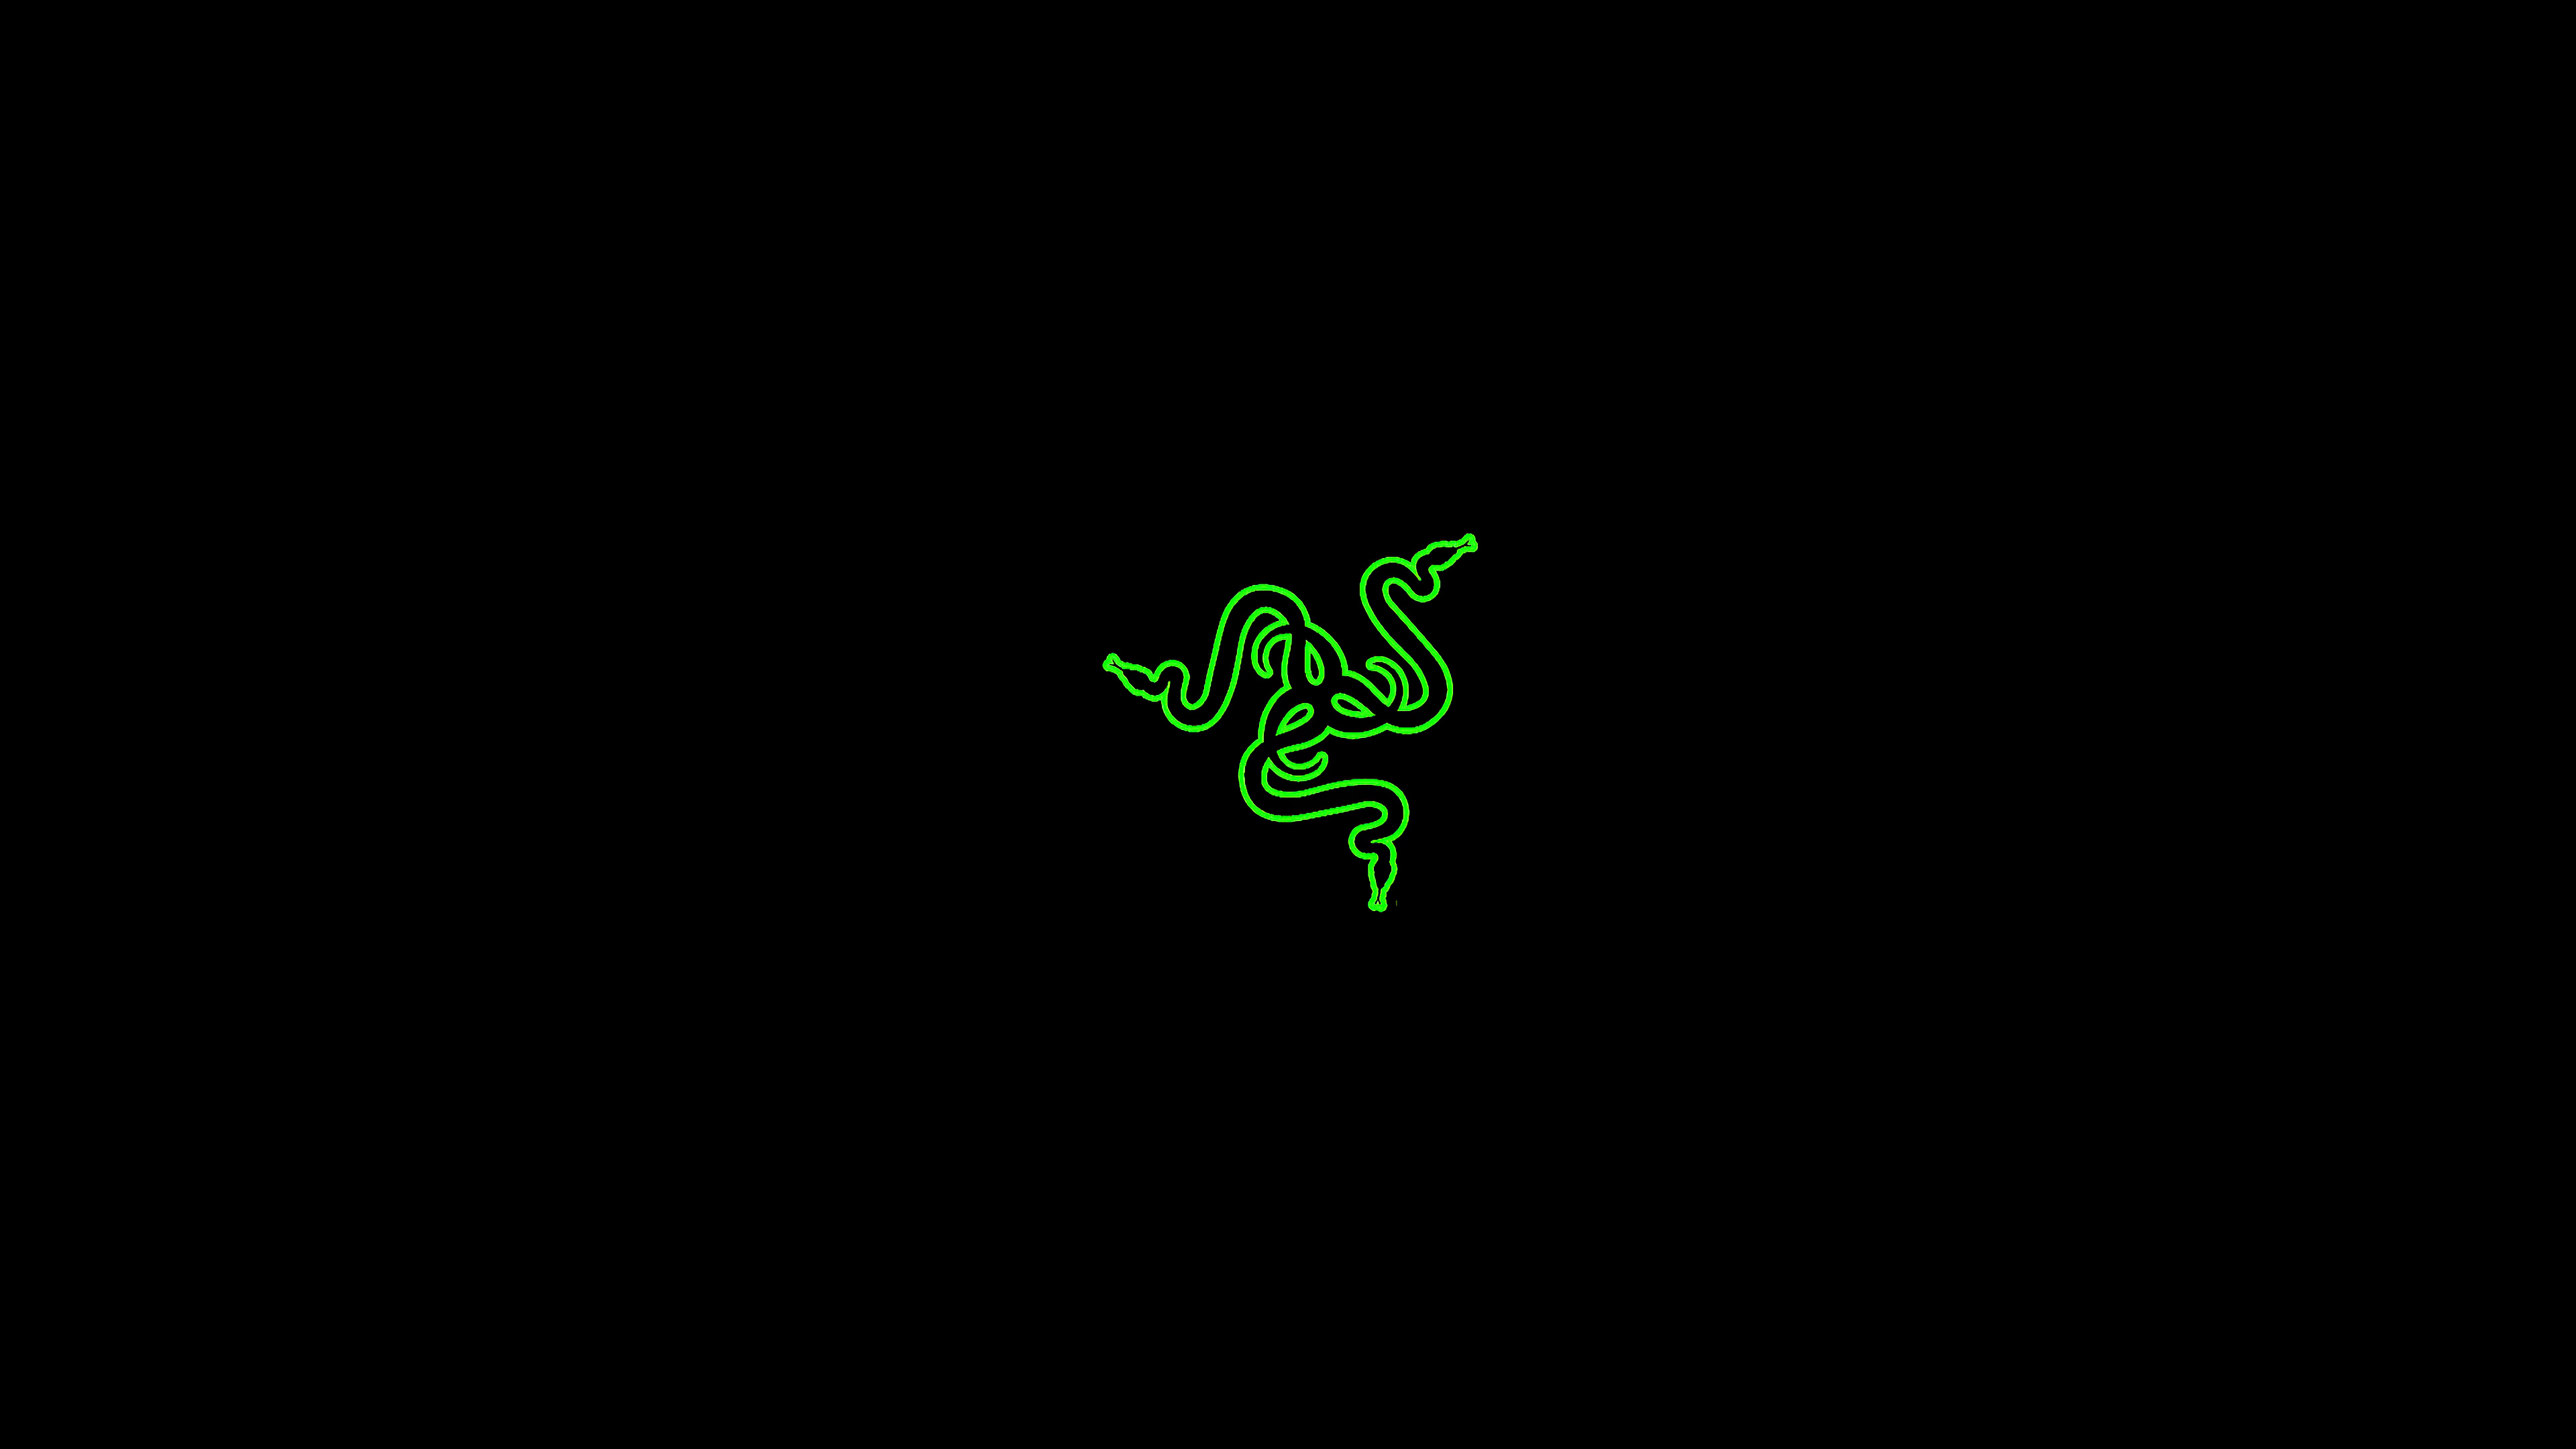 Razer logo dark k hd puter k wallpapers images backgrounds photos and pictures